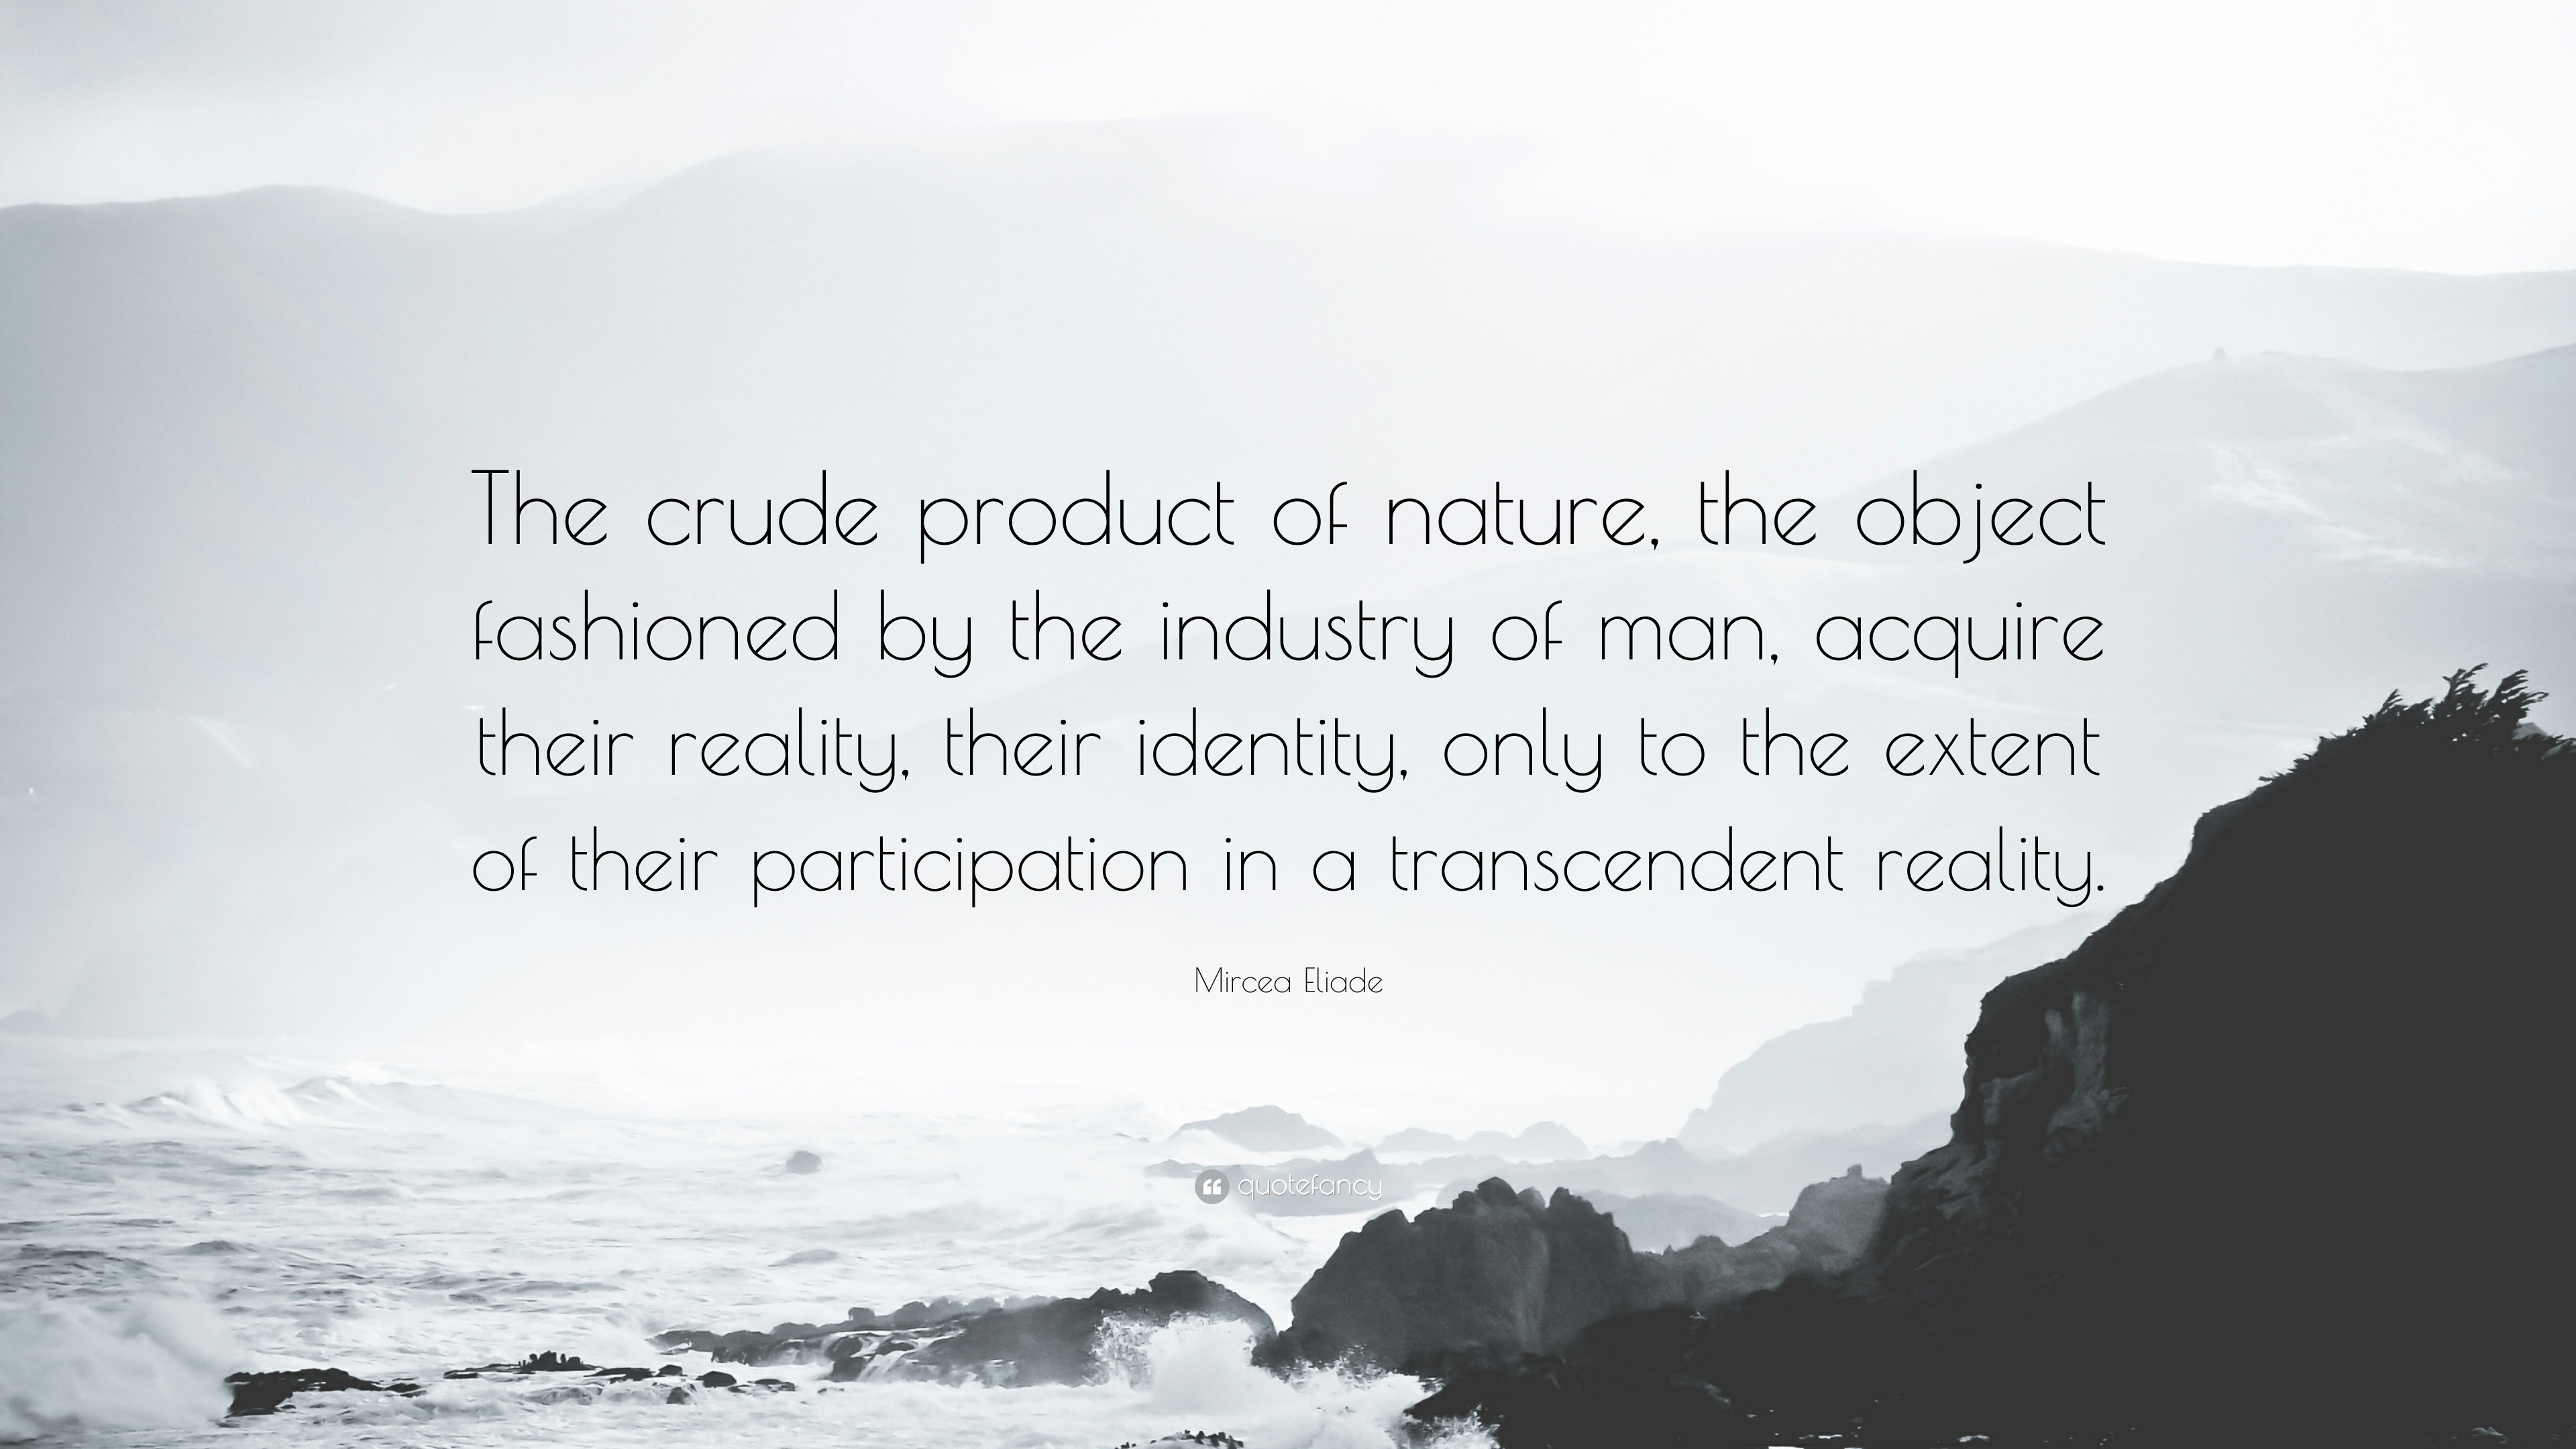 https://quotefancy.com/media/wallpaper/3840x2160/1325182-Mircea-Eliade-Quote-The-crude-product-of-nature-the-object.jpg